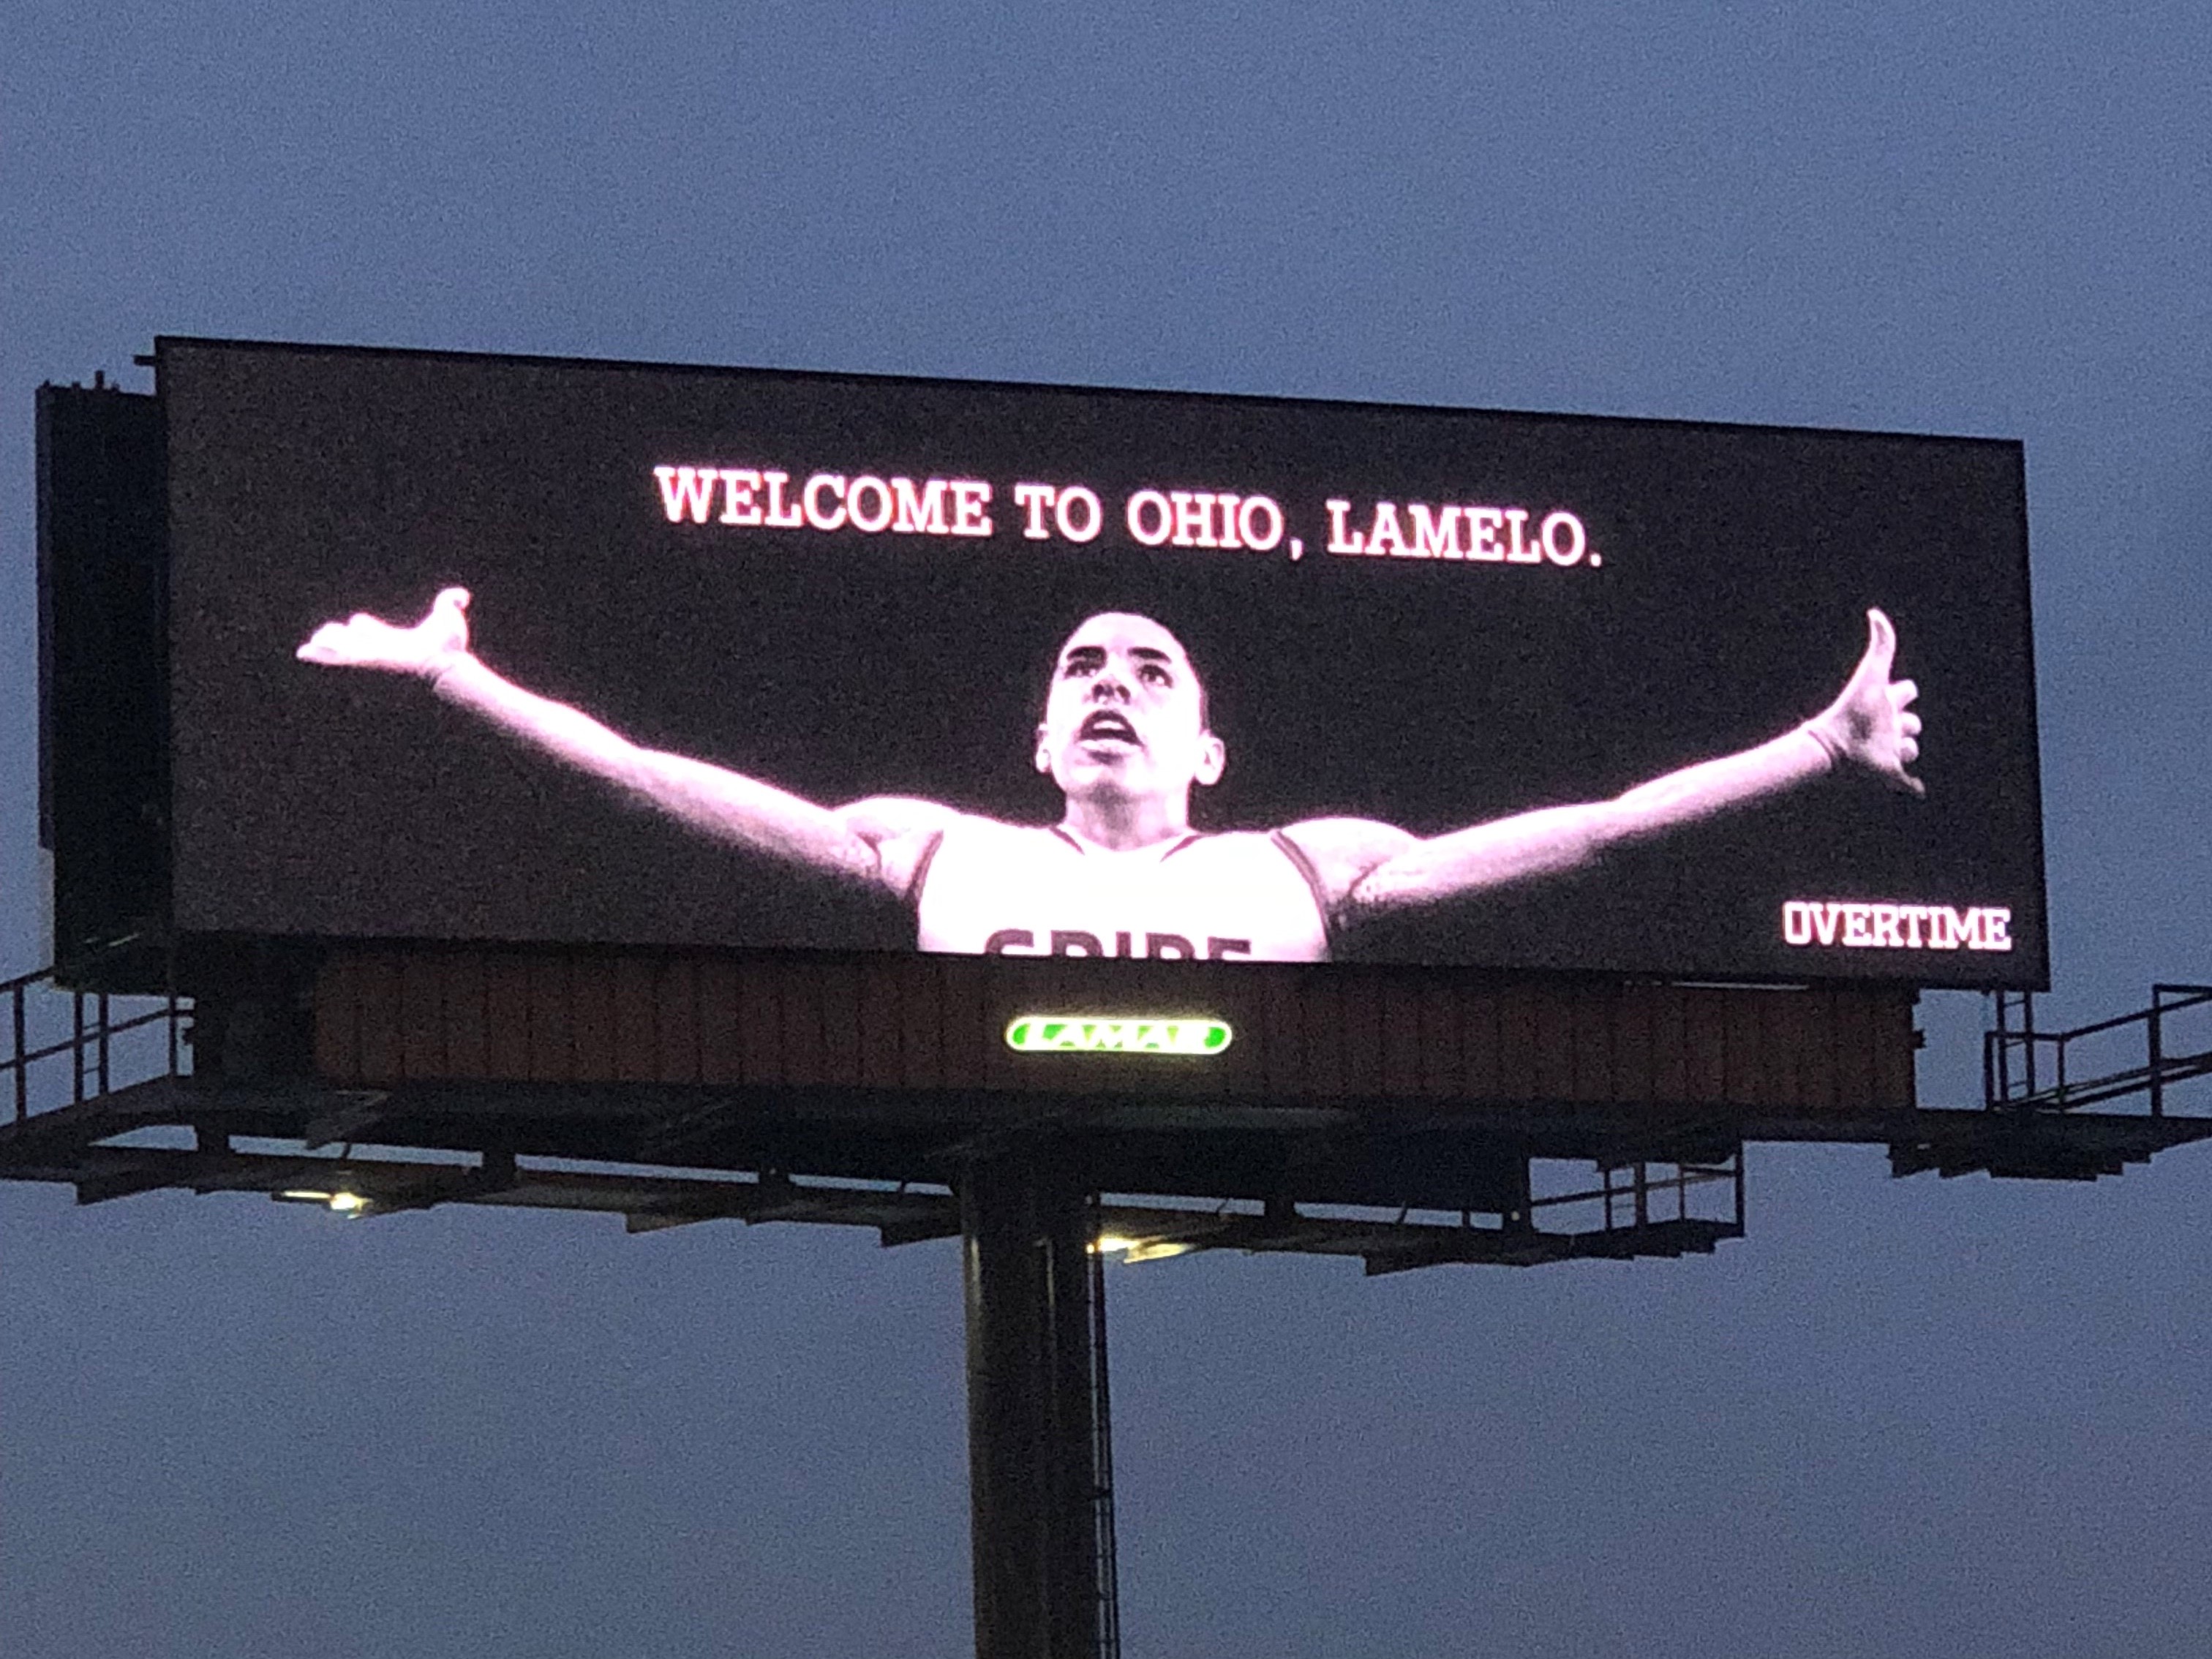 LaMelo Ball welcomed to Ohio with LeBron James-like billboard